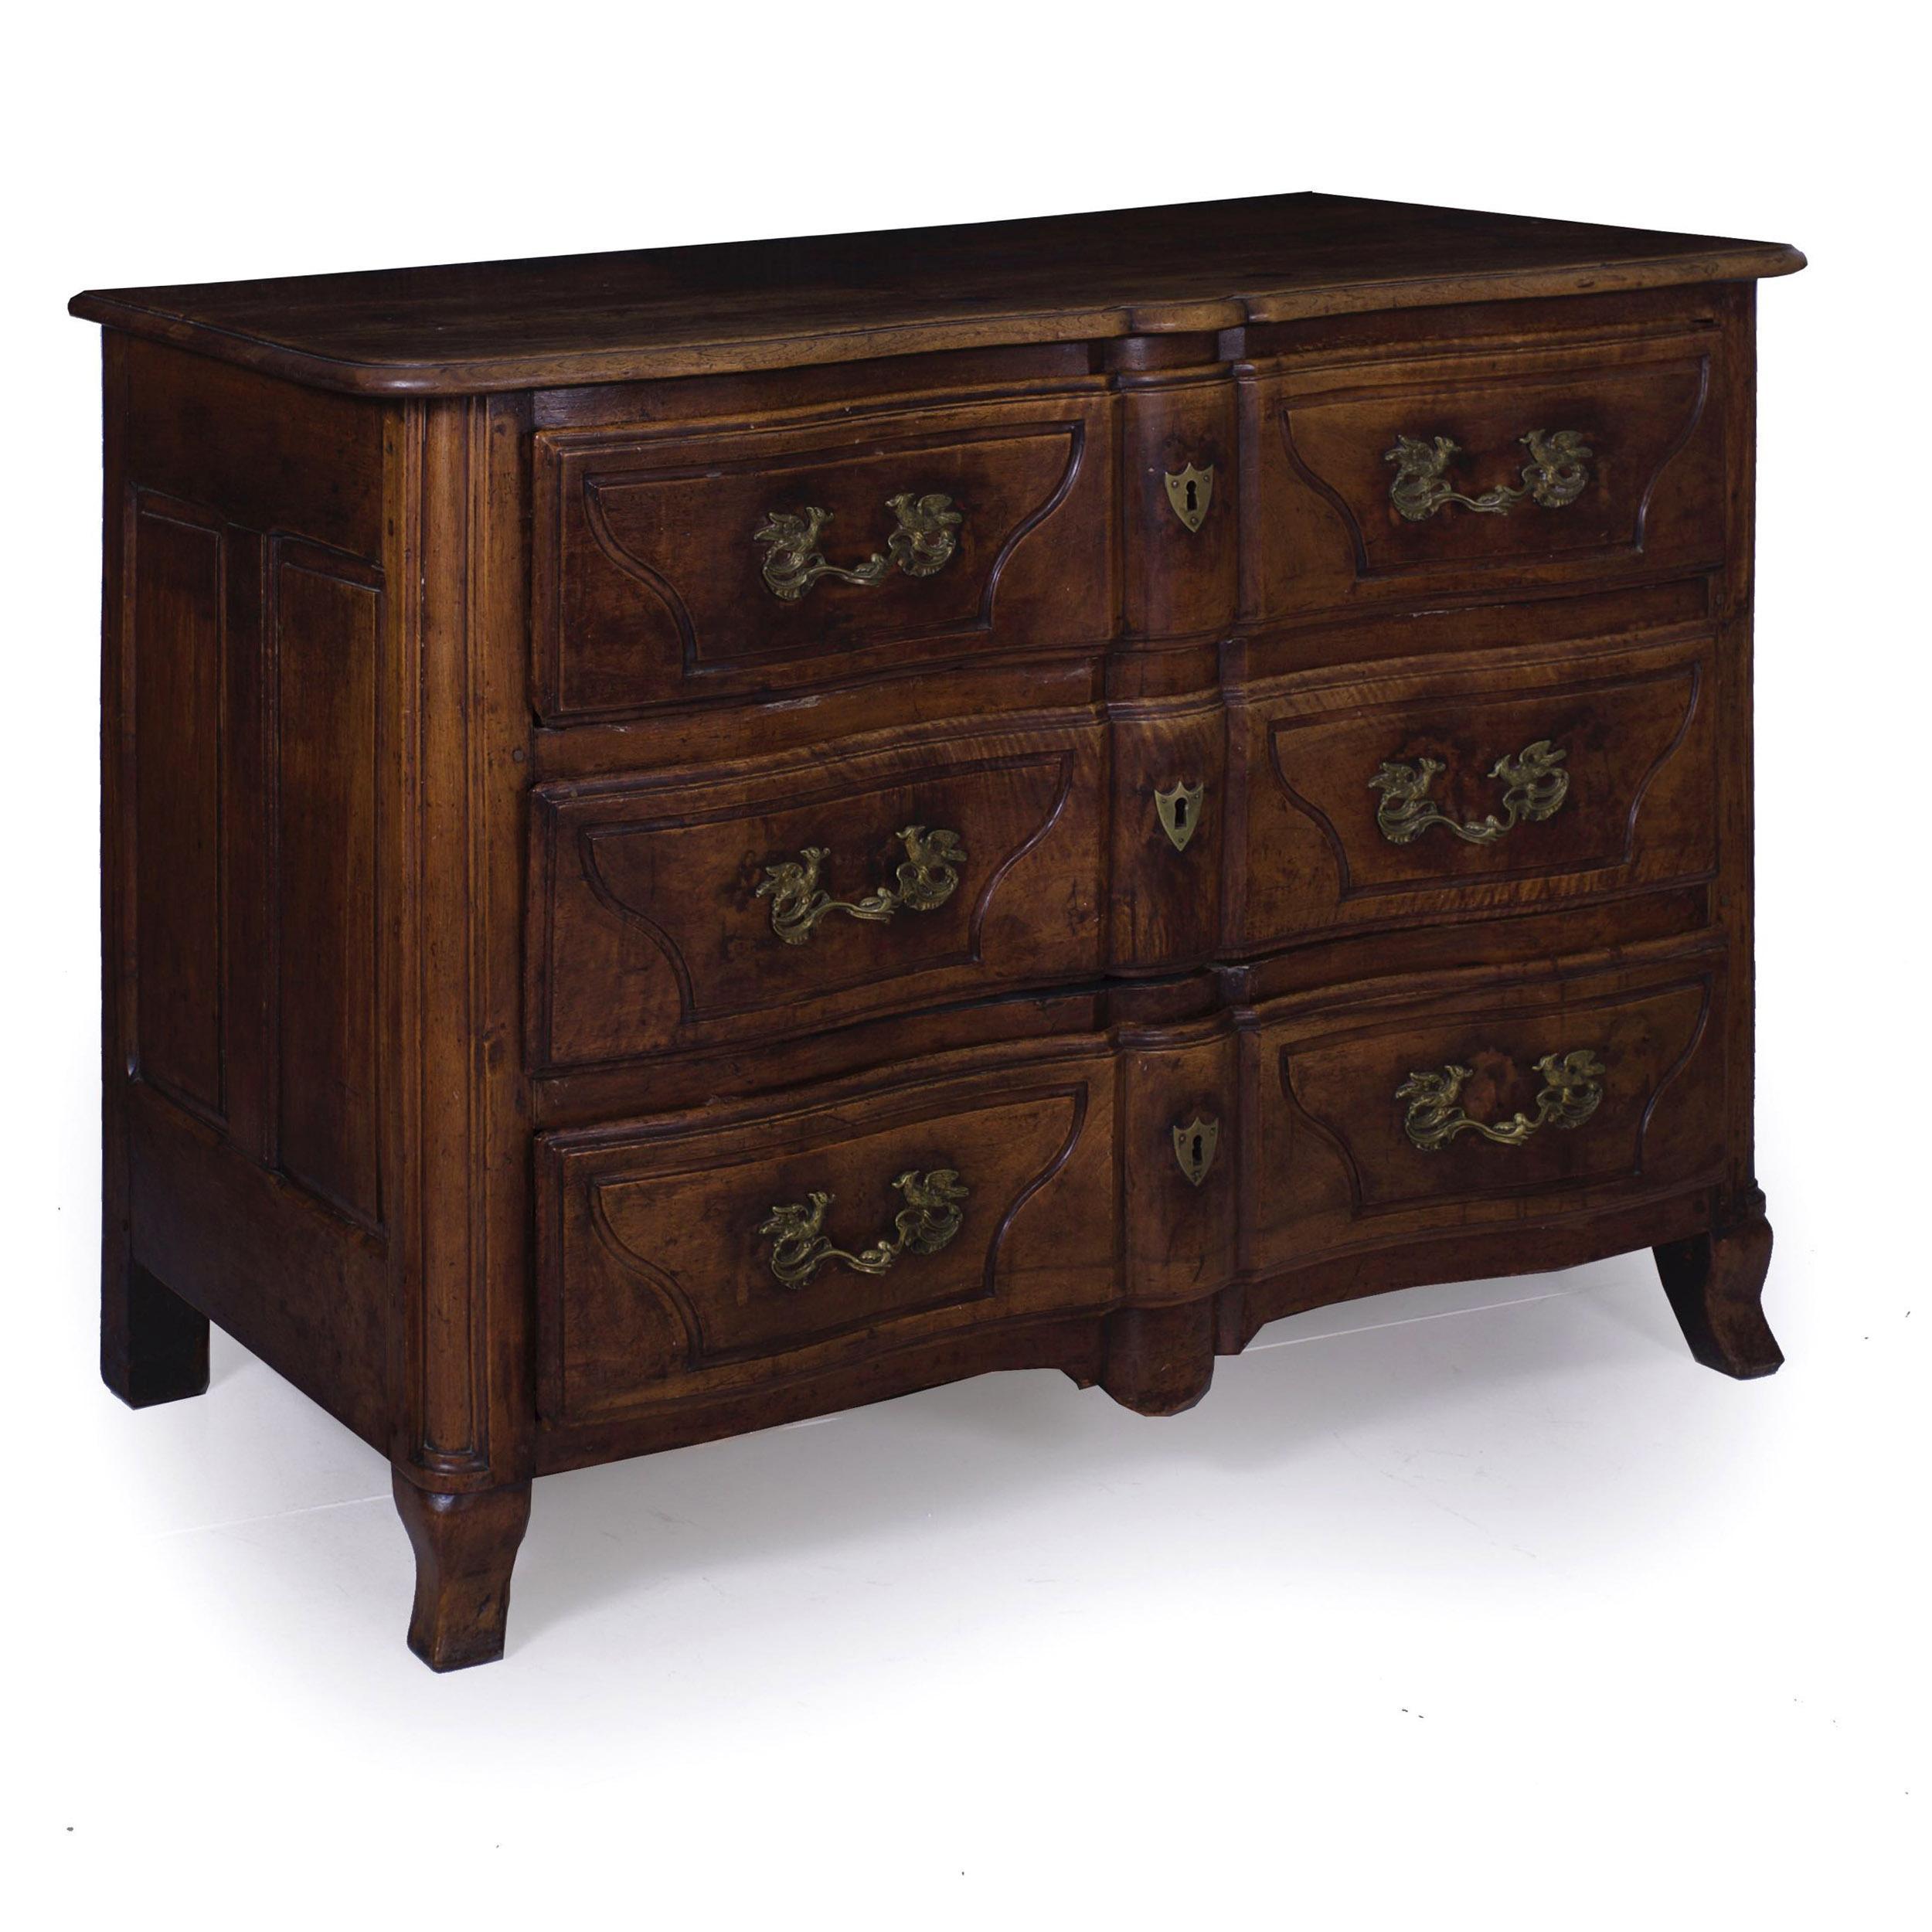 A FINE REGENCÉ PERIOD WALNUT COMMODE WITH BIRD-FORM PULLS
France, circa 1730-50
Item # 010PXZ21Q 

A rare and very fine 18th century commode of the Regencé period, this substantial chest of drawers has been beautifully preserved. The dense walnut